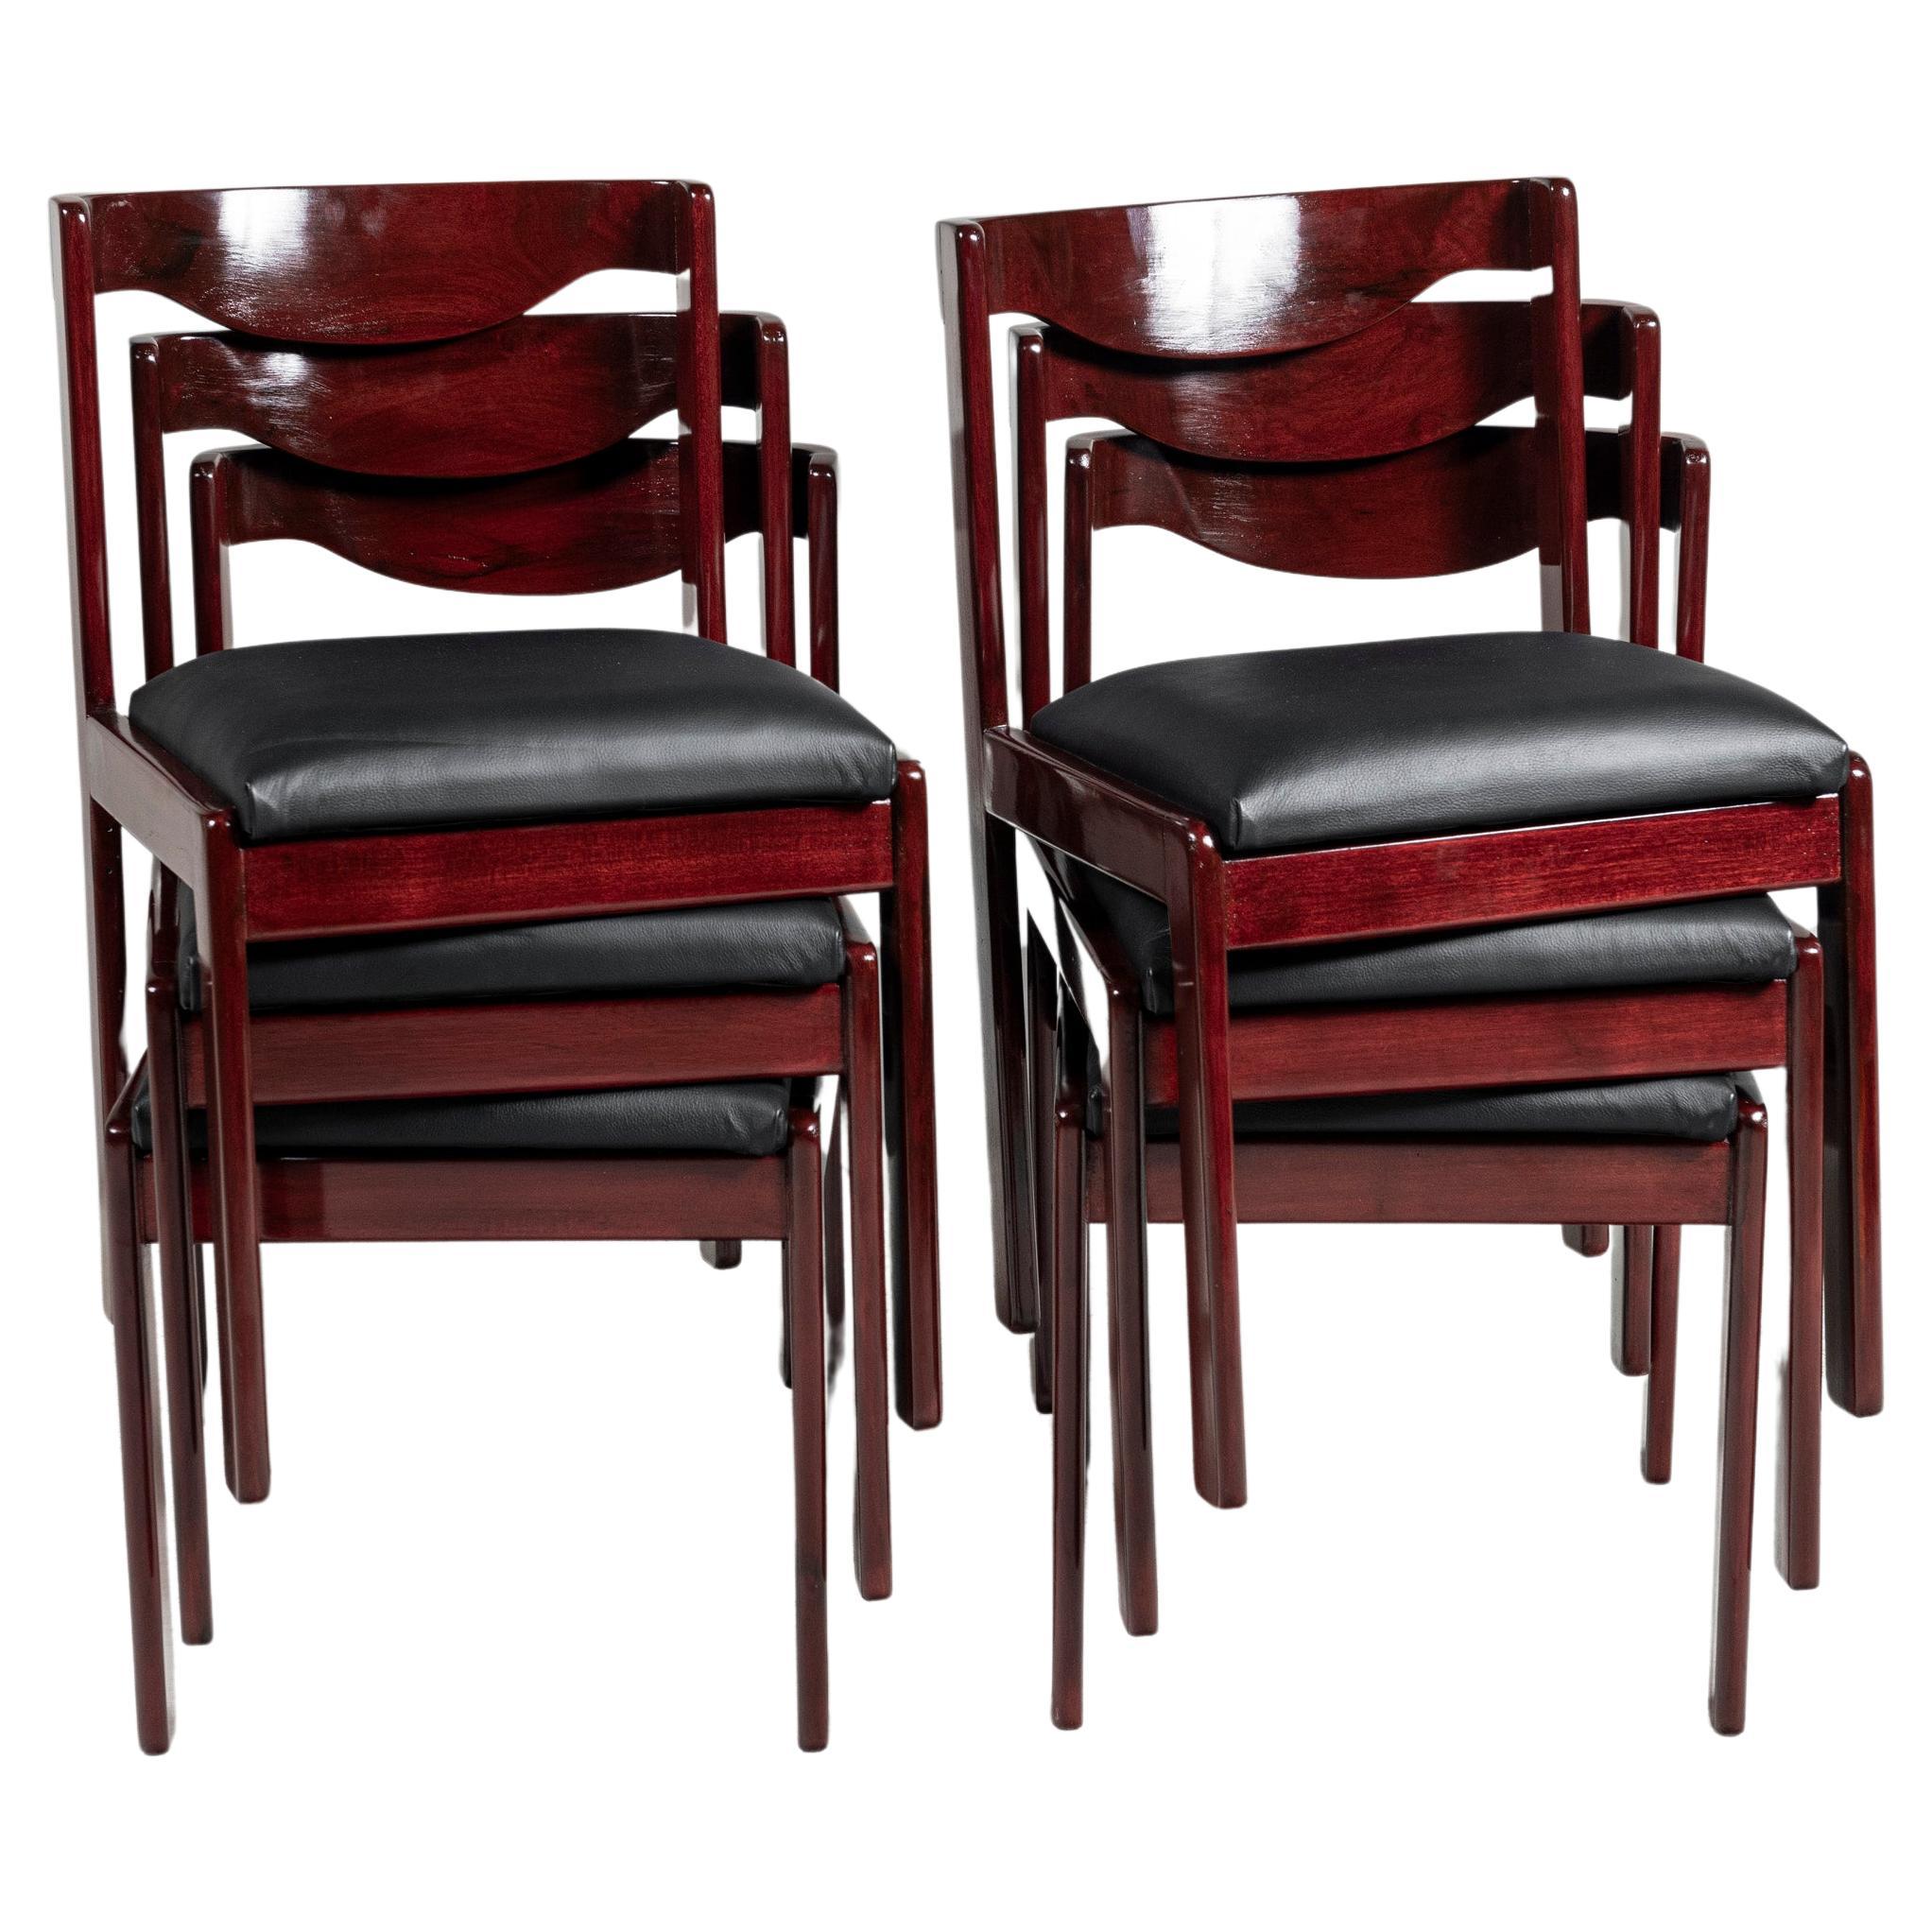 Wood and leather set of 6 LP chairs designed by Ricardo Blanco, Argentina, 1970.